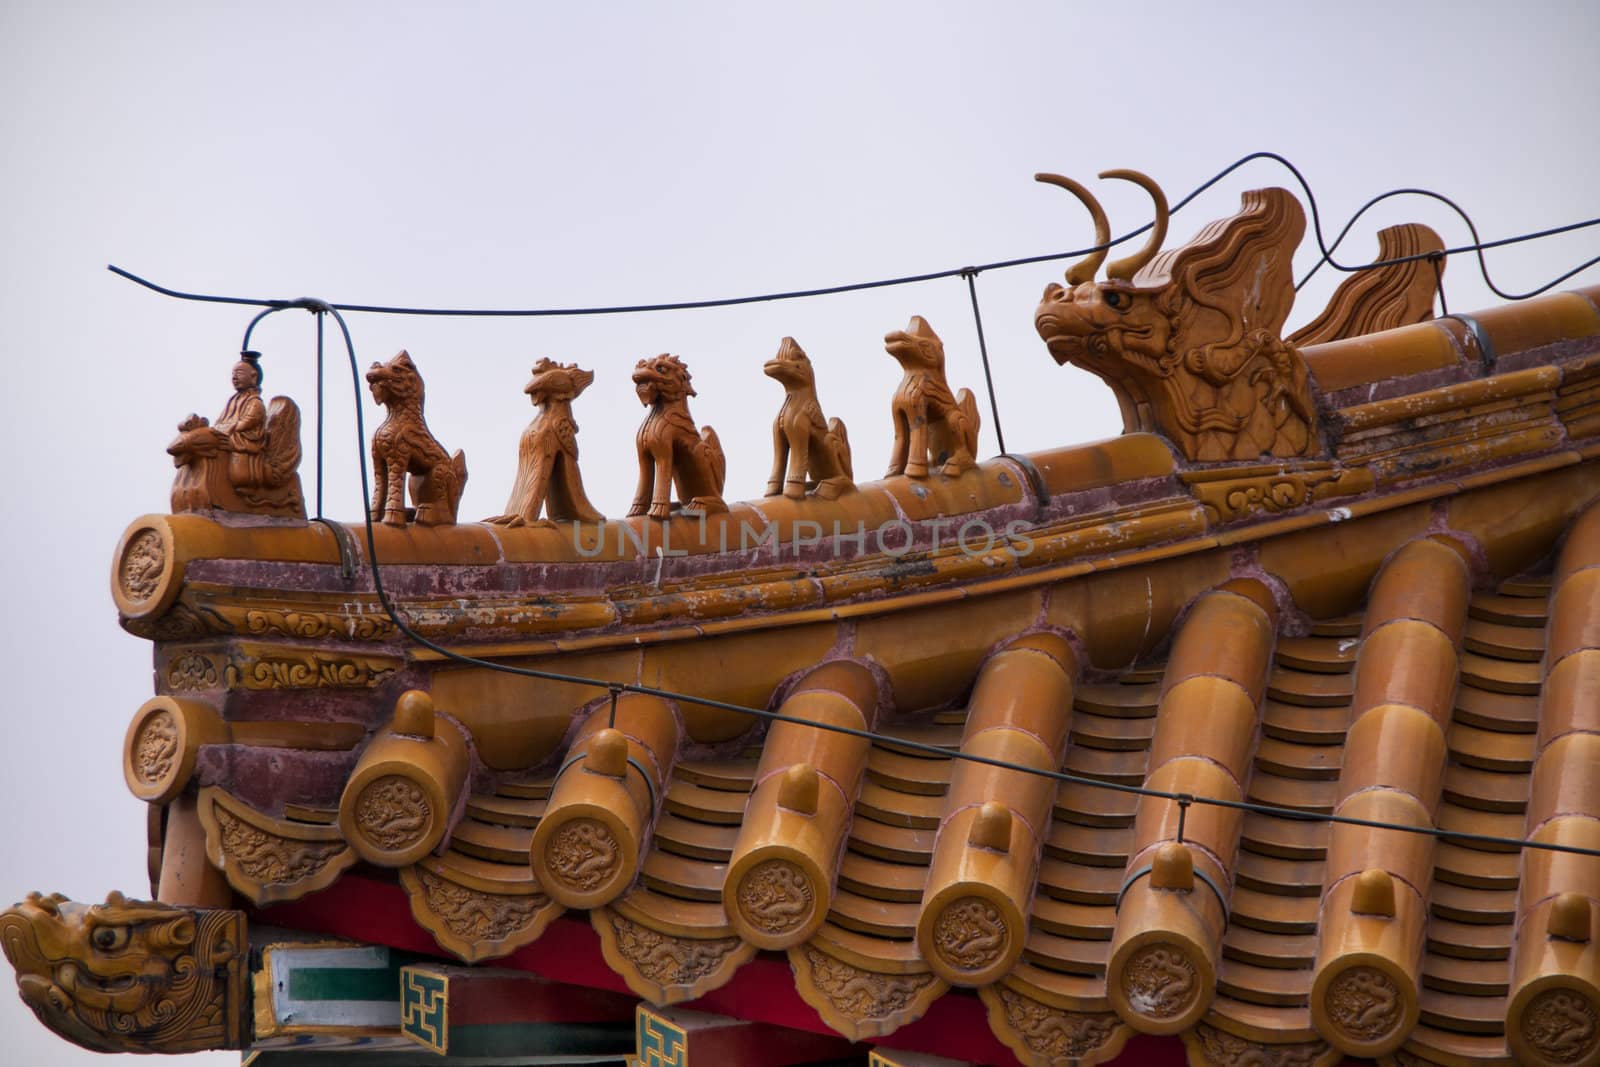 Beijing Forbidden City: detail of roof. by Claudine